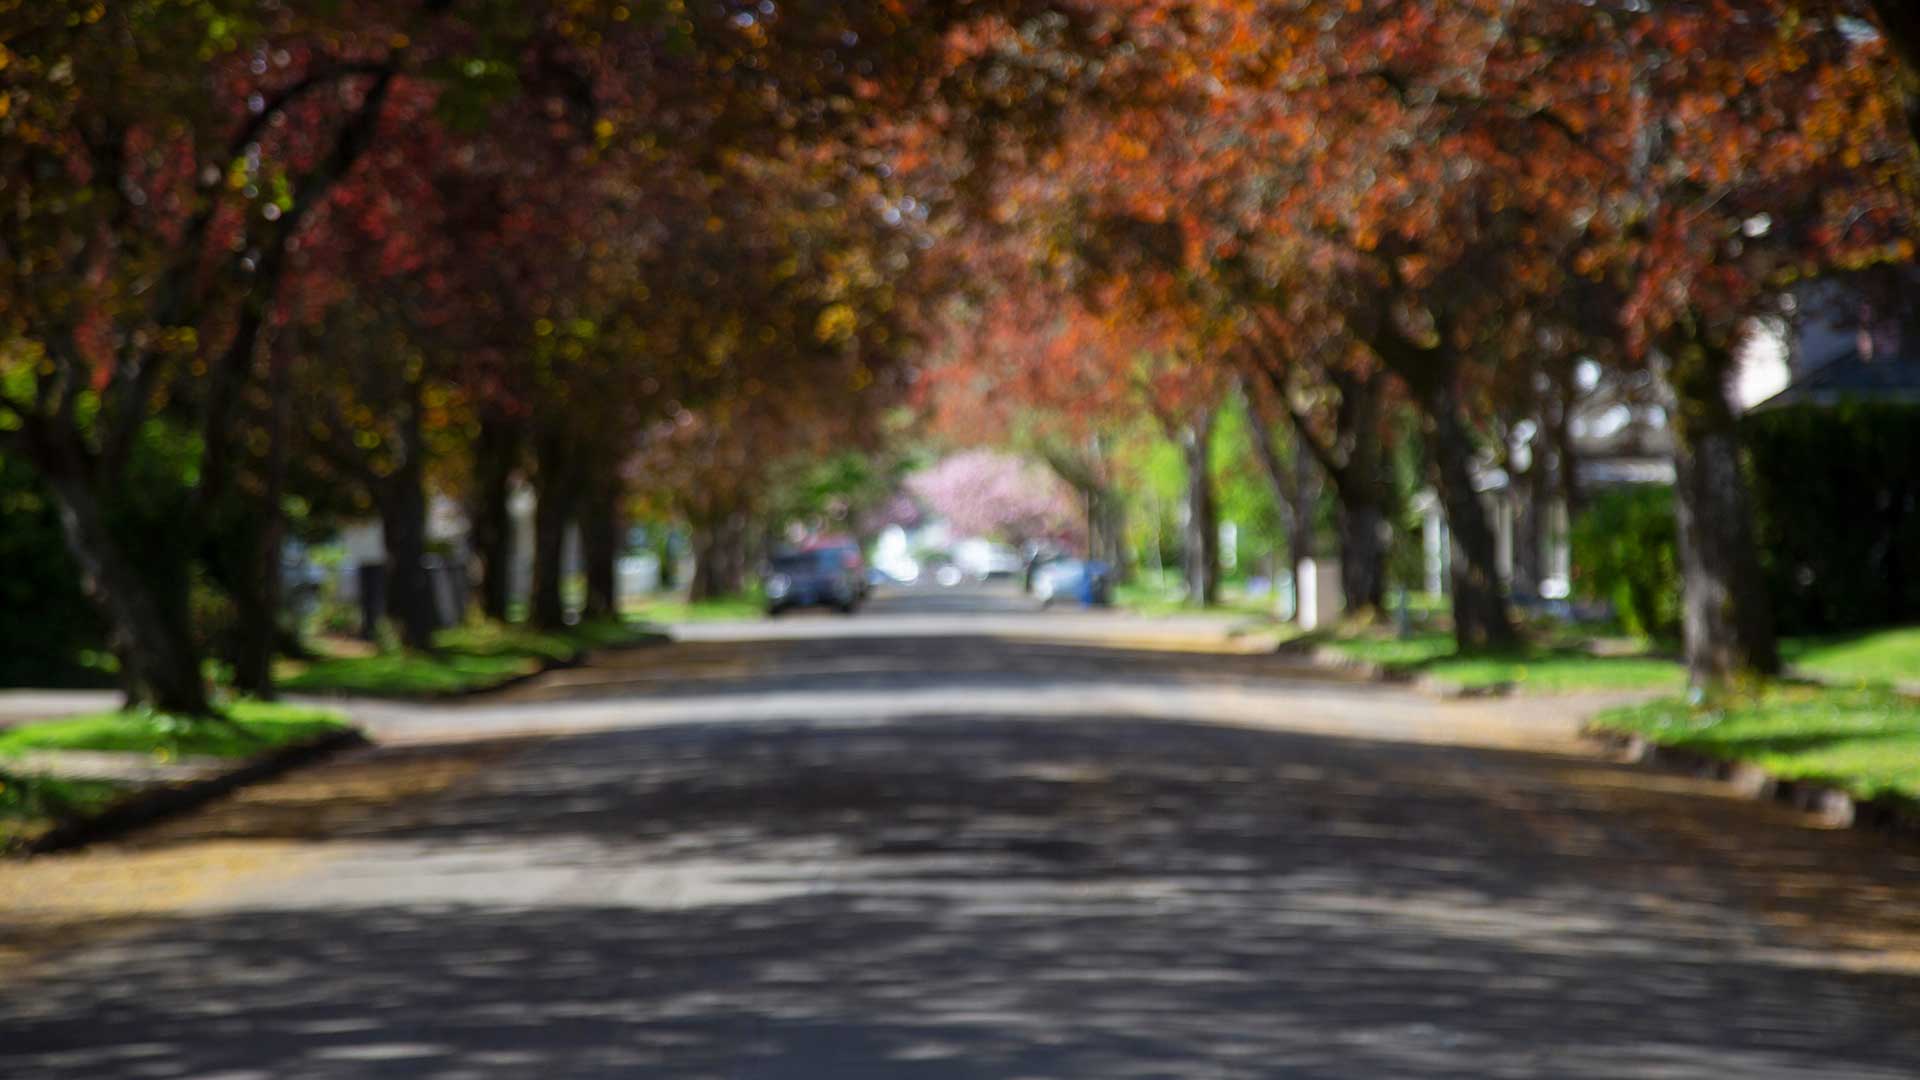 A residential street in Ashland, OH.